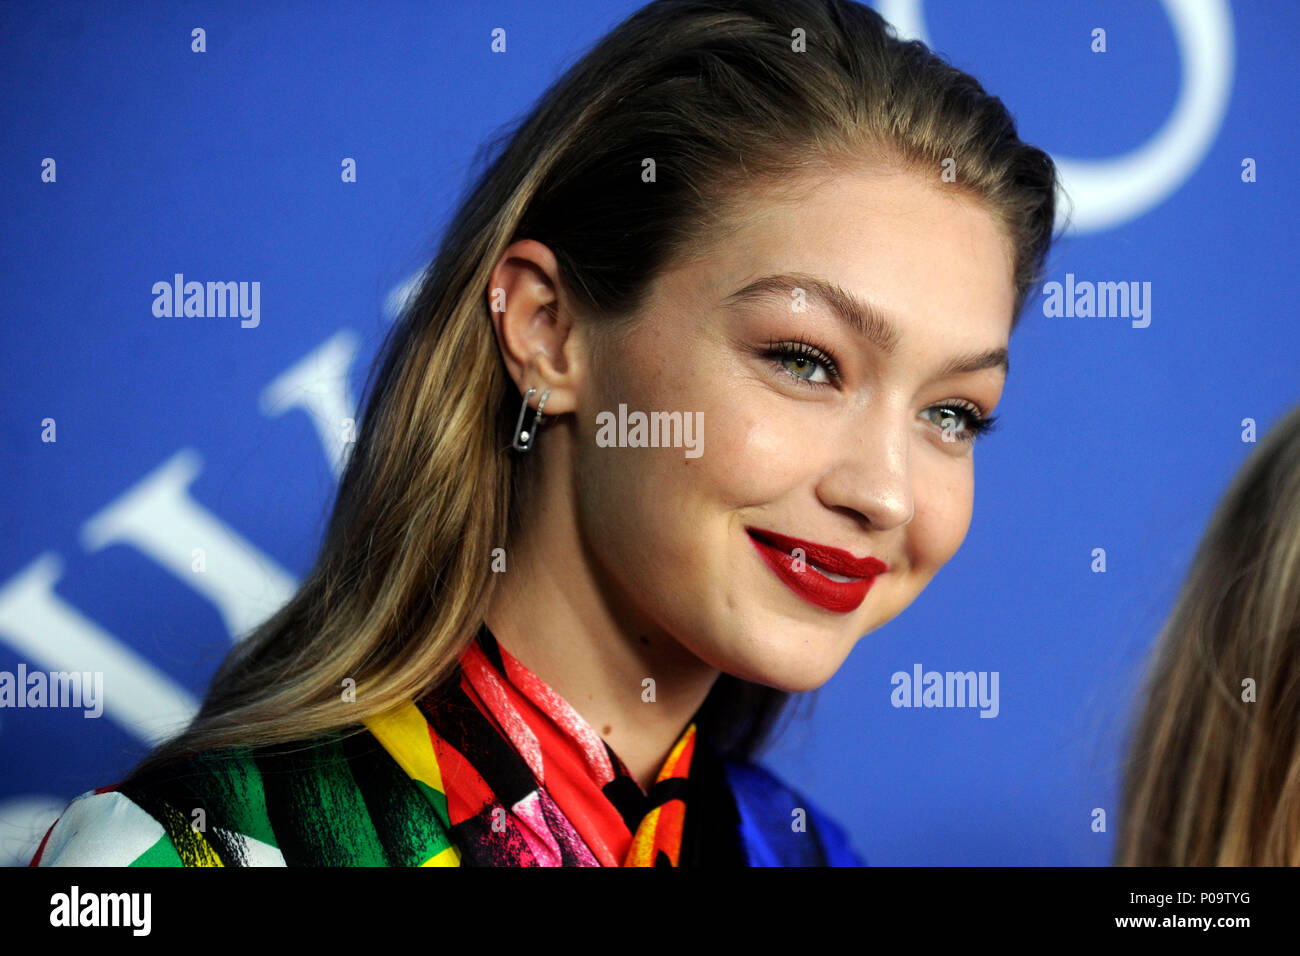 Gigi Hadid attending the CFDA Fashion Awards 2018 at the Brooklyn Museum on  June 4, 2018 in New York City Stock Photo - Alamy